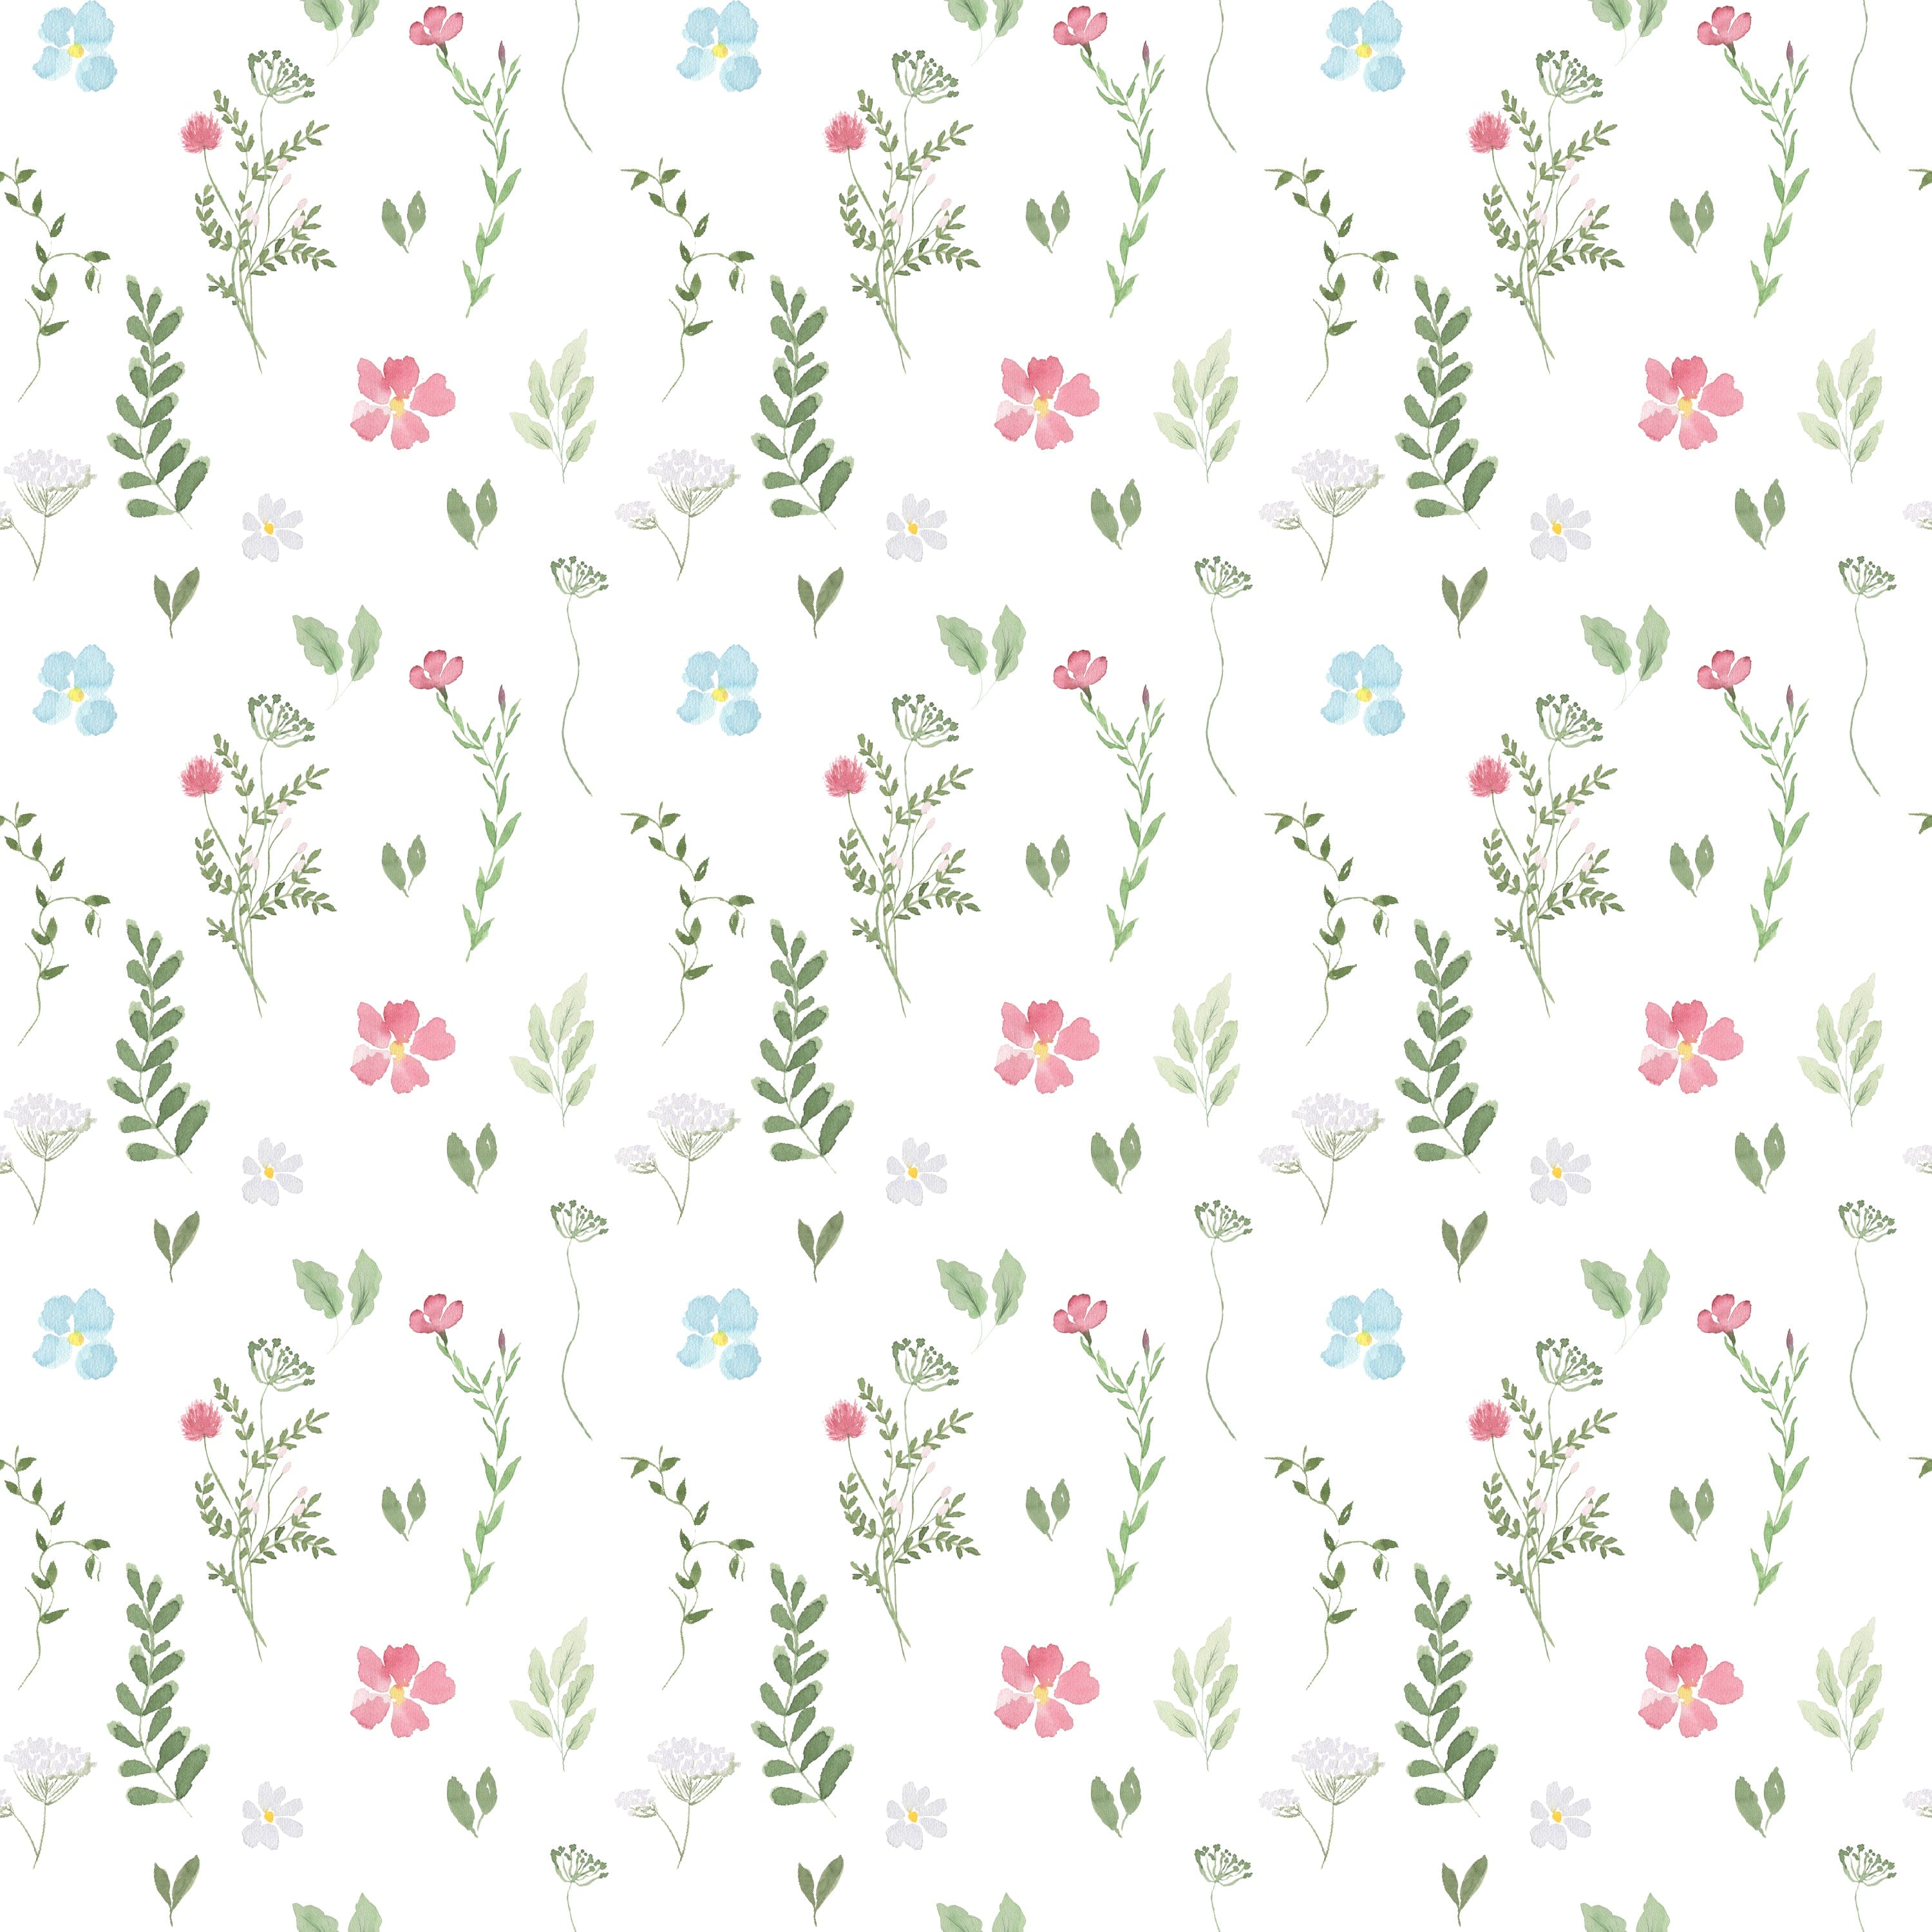 Pattern detail of the Spring Field Wallpaper - VIII, featuring a delightful watercolor-style design with pink, blue, and yellow flowers and green leaves on a white background